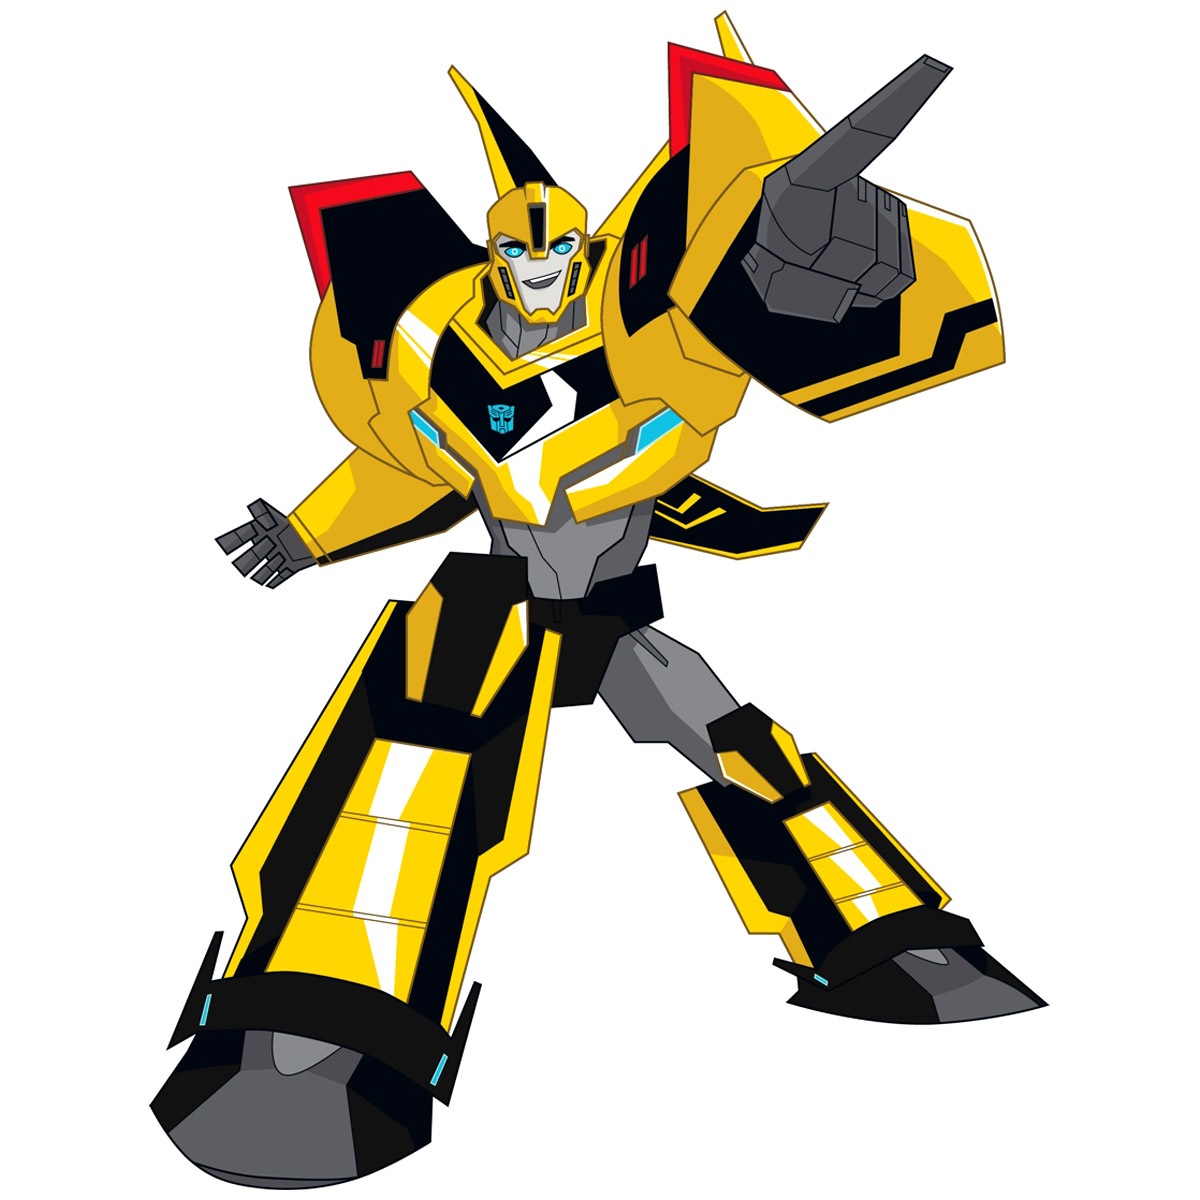 New Transformers Cartoon Revealed - First Look at Bumblebee 